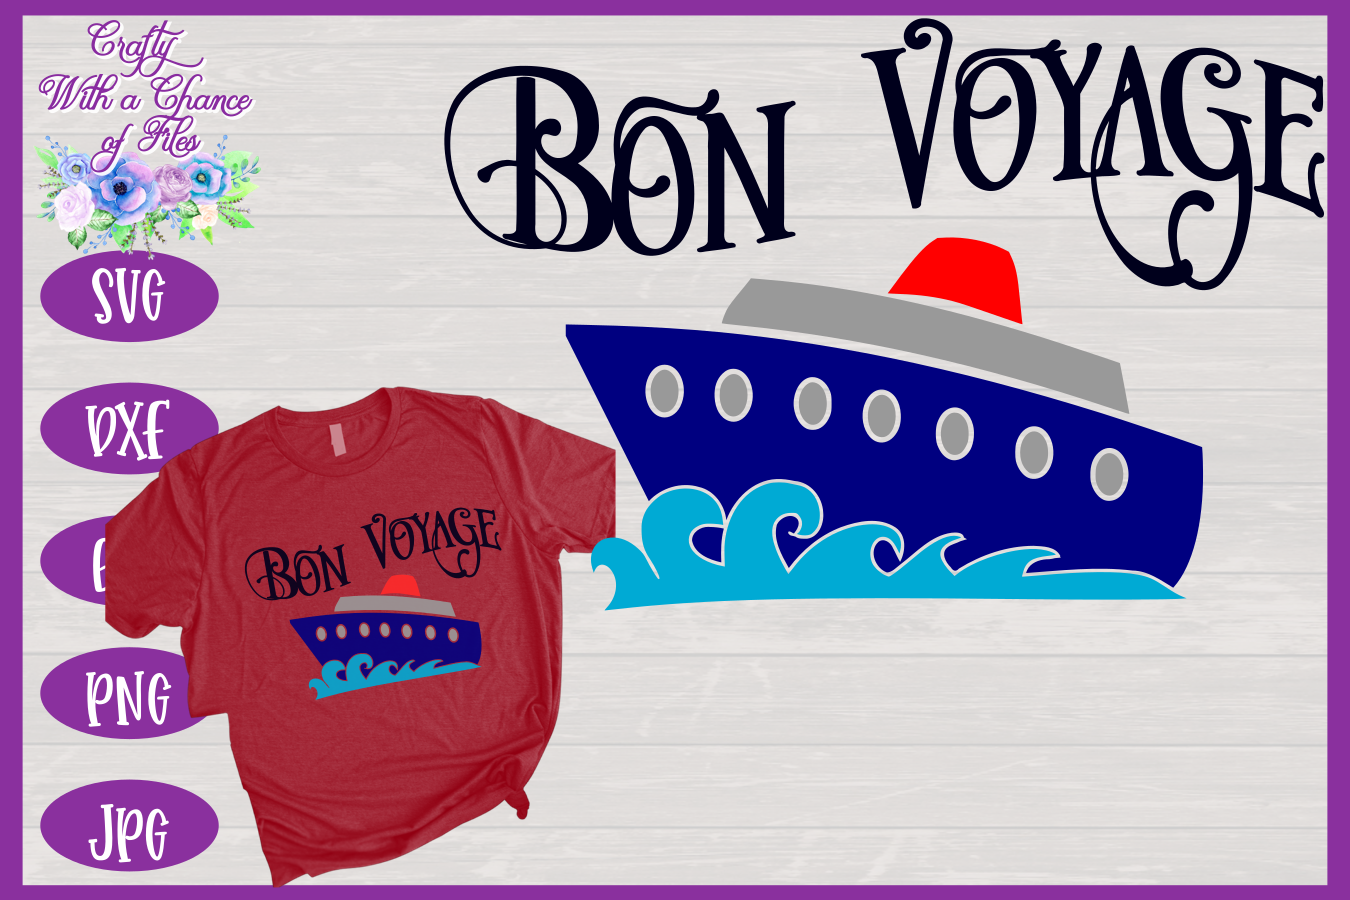 Cruise Svg Bon Voyage Svg Cruise Shirt Svg By Crafty With A Chance Of Files Thehungryjpeg Com